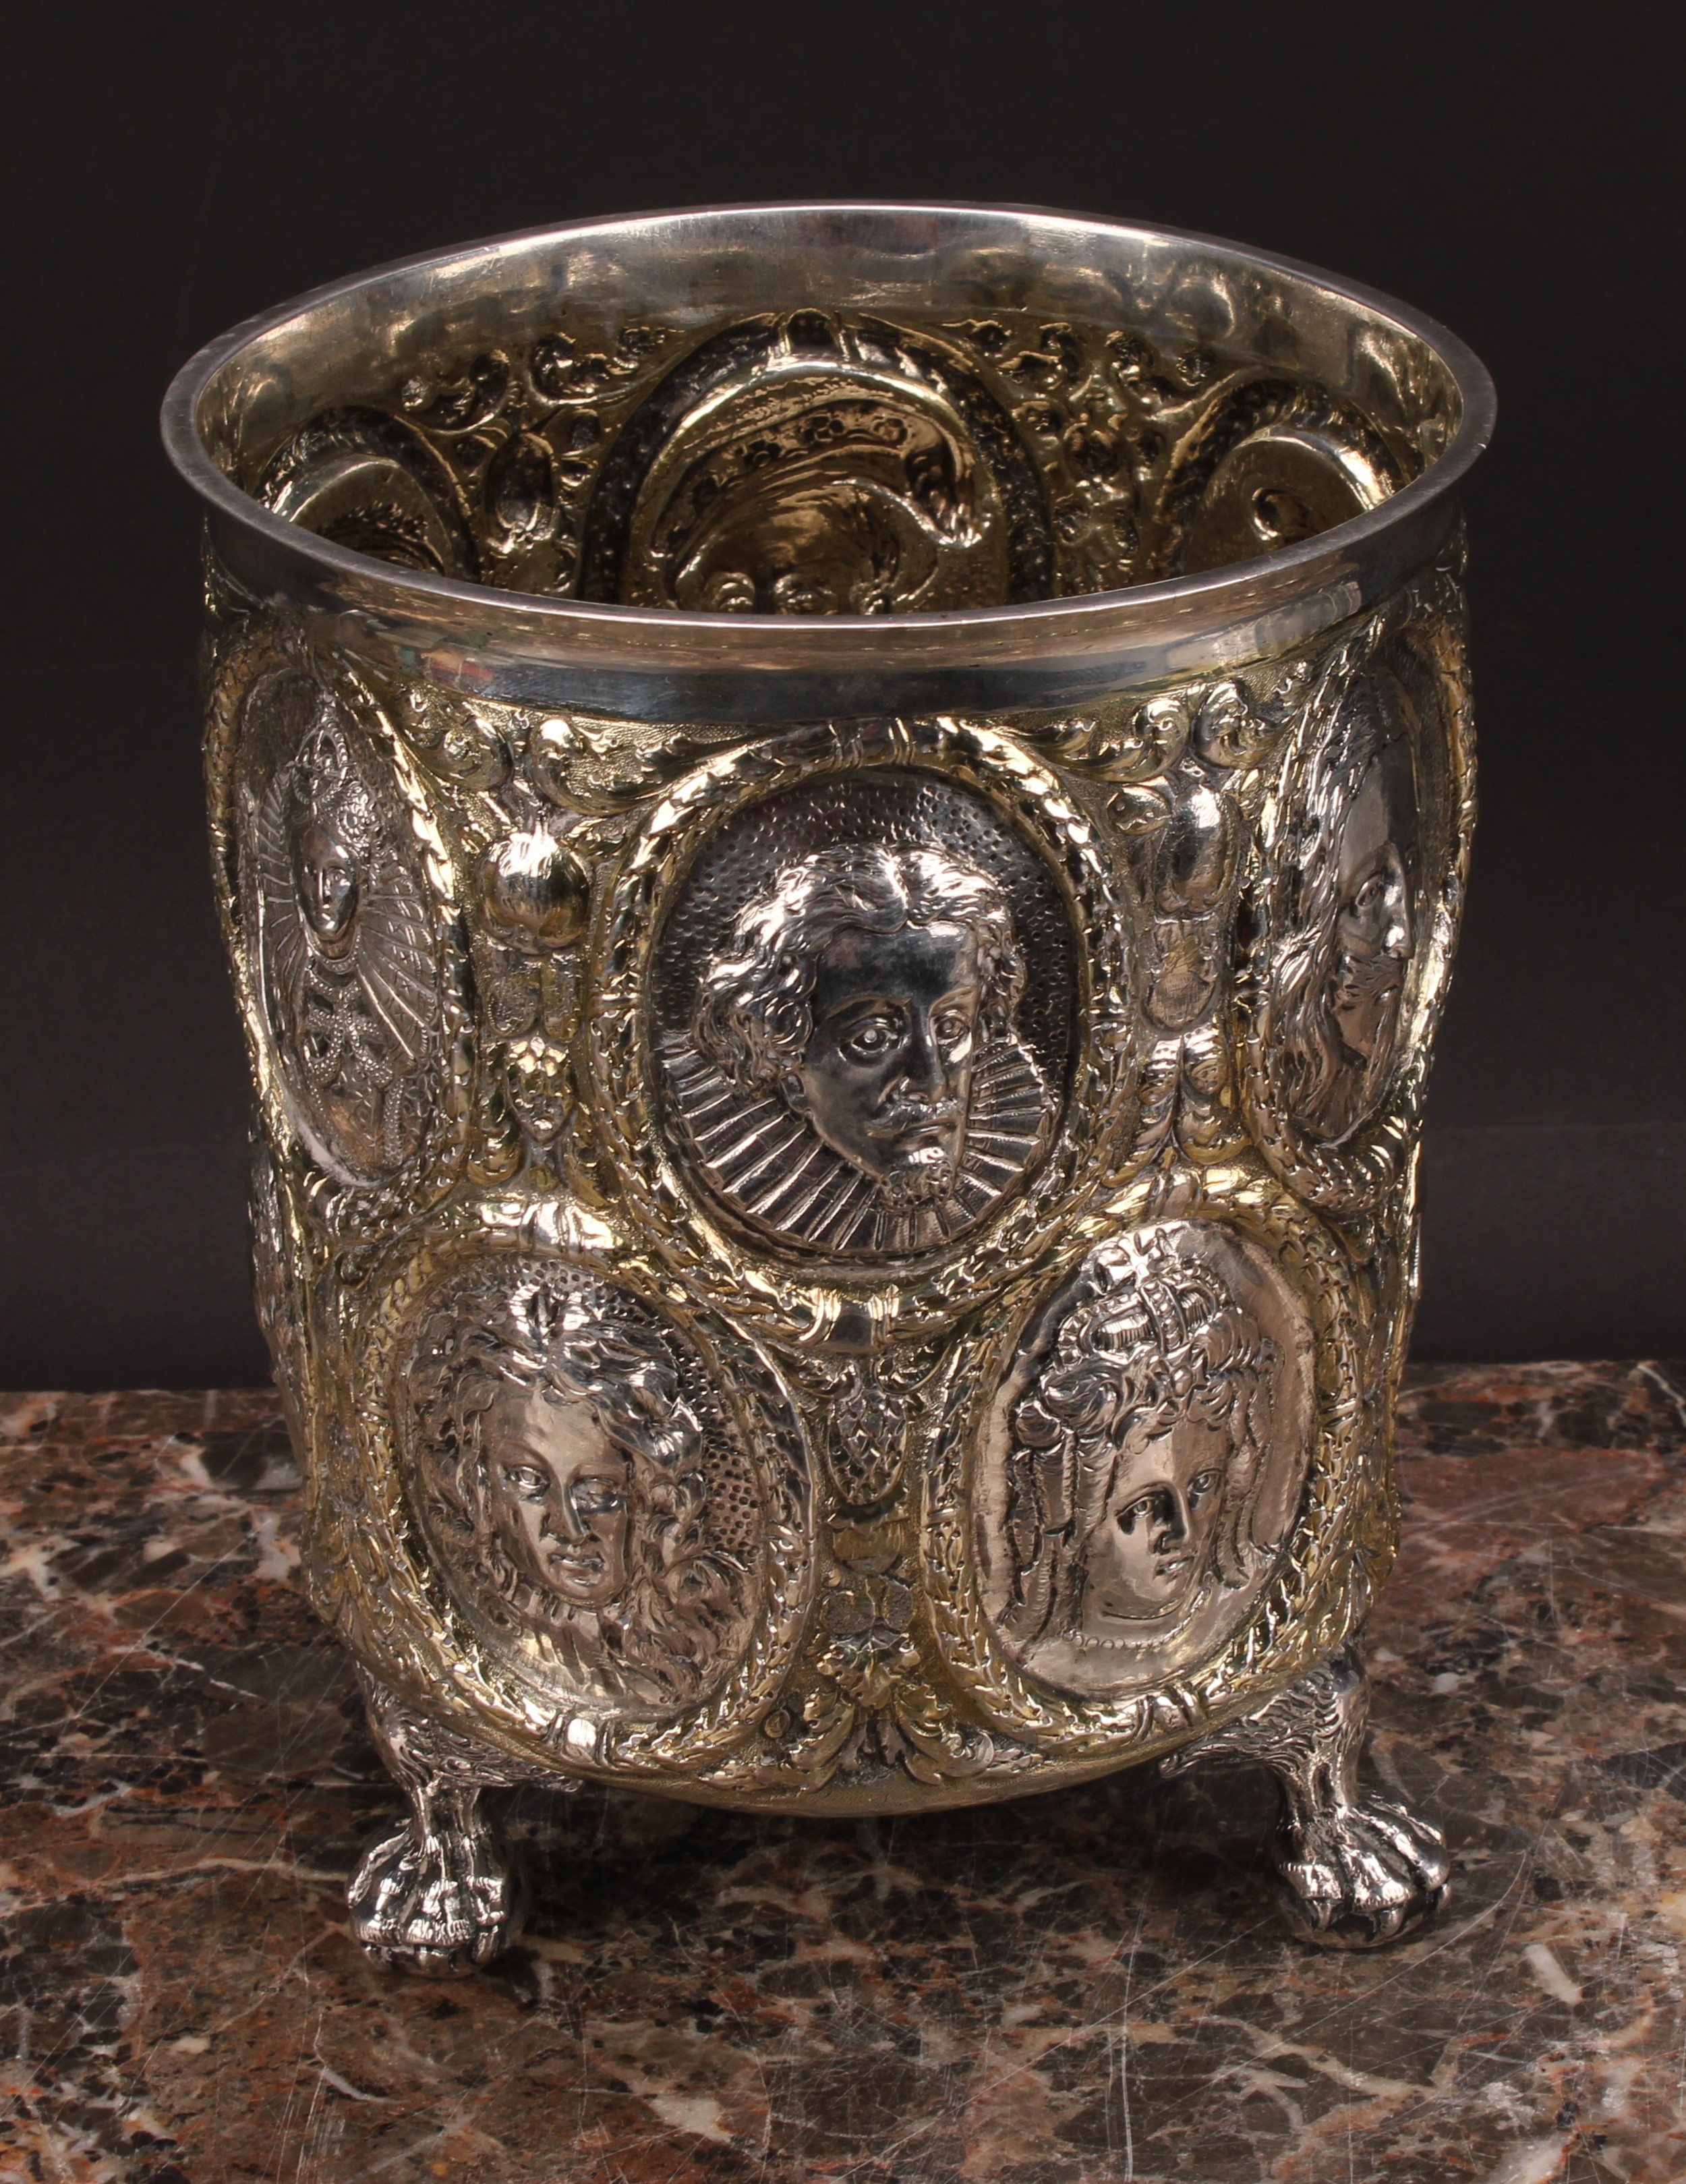 A large 17th/early 18th century German parcel-gilt silver beaker, chased as a Renaissance portrait - Image 5 of 6